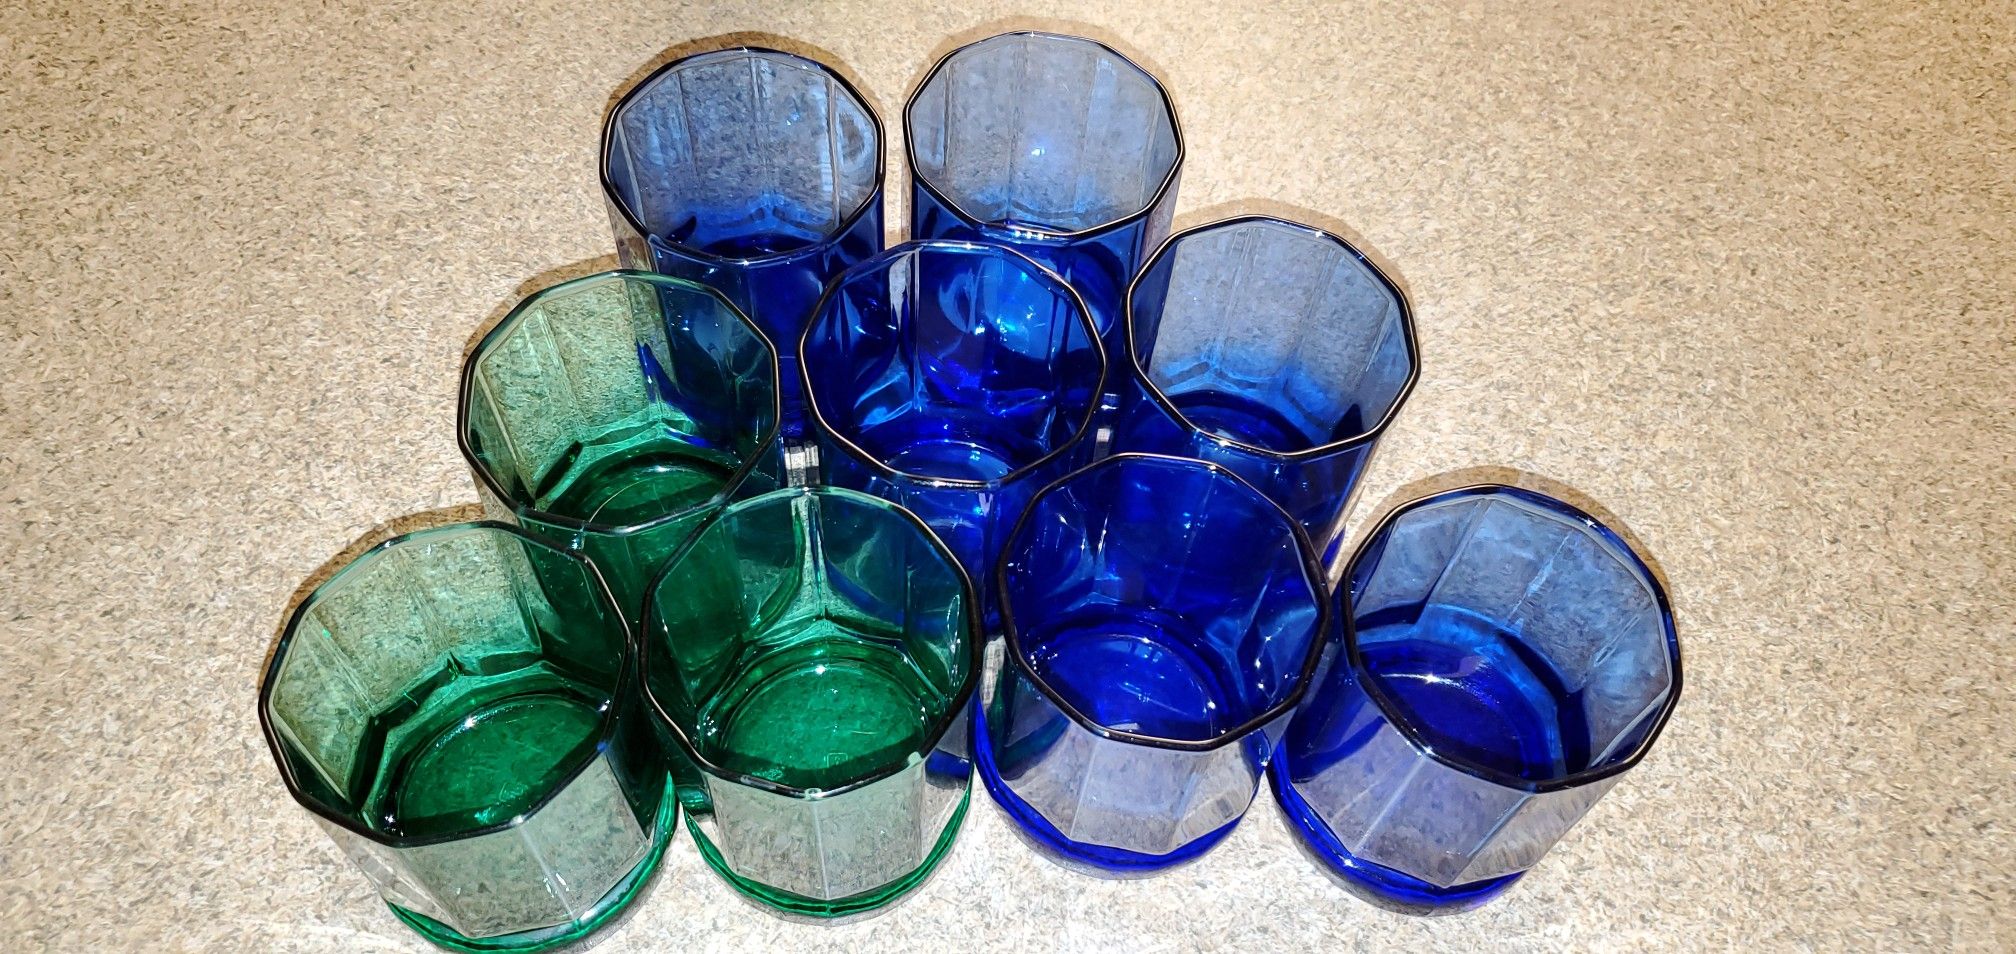 (9) Anchor Hocking Cobalt Blue & Juniper Green Essex 10 Panel Double Old Fashioned Glasses Made in the USA